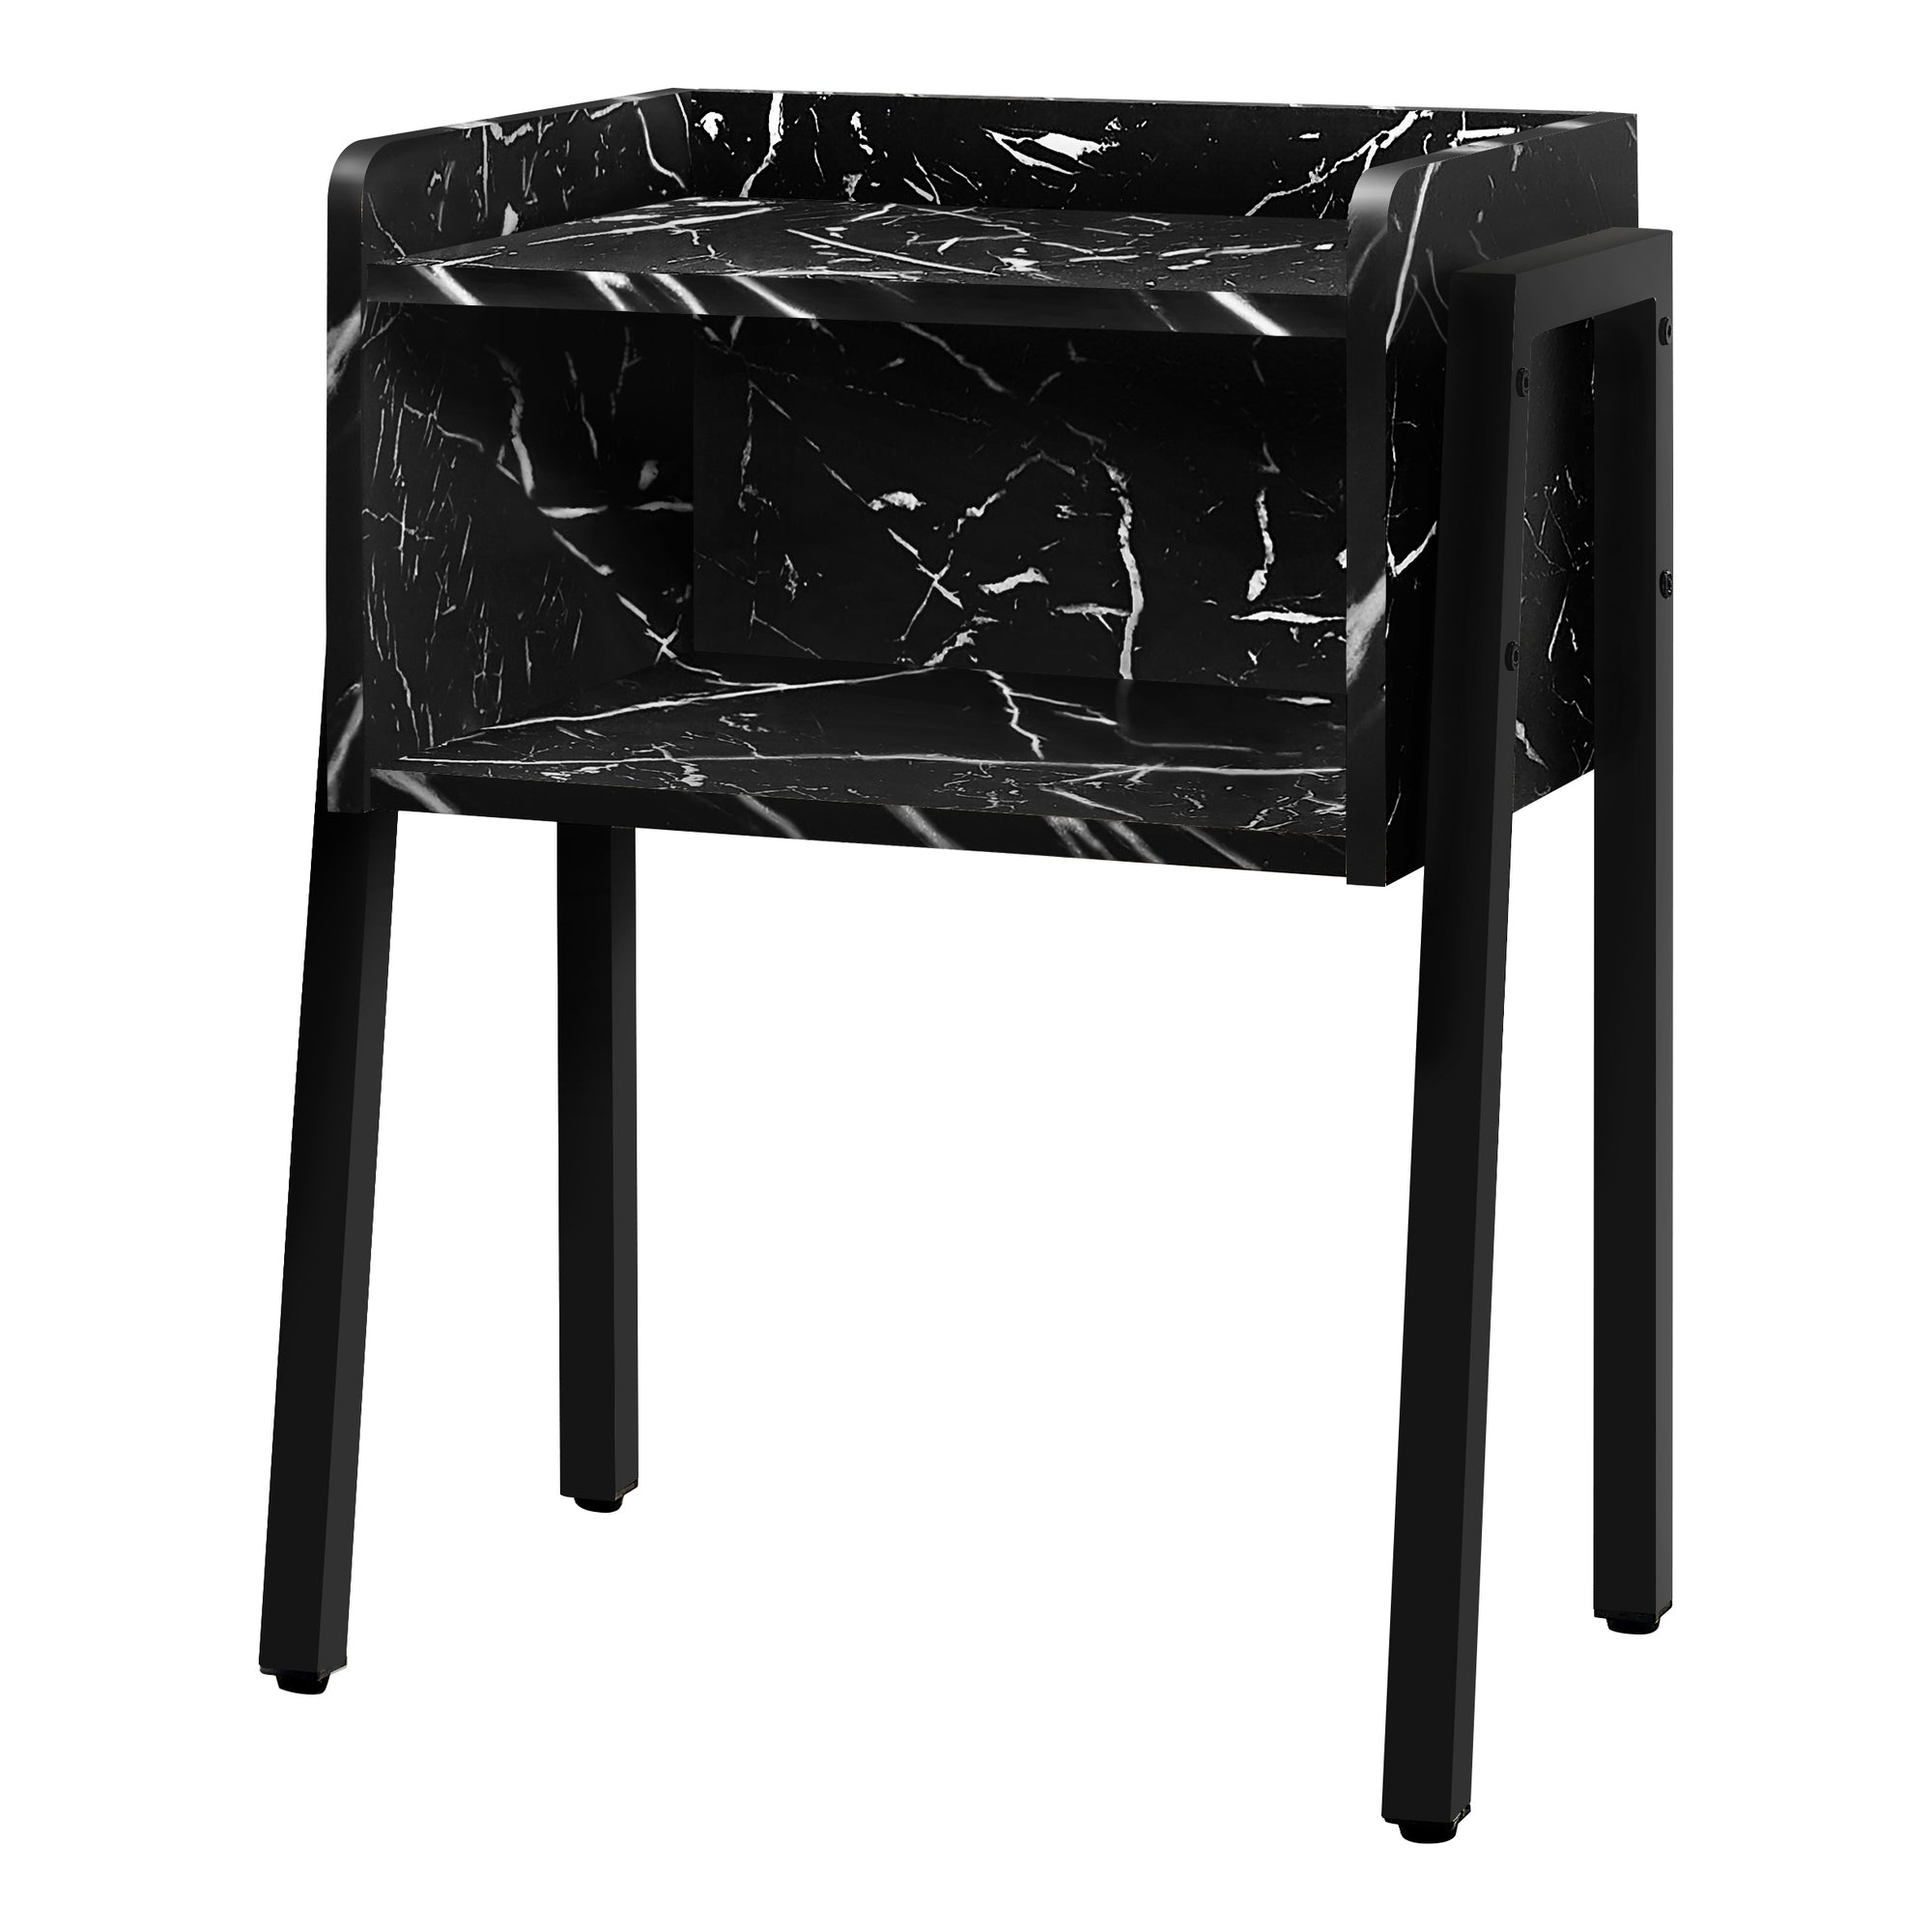 MN-483590    Accent Table, Side, End, Nightstand, Lamp, Living Room, Bedroom, Metal Legs, Laminate, Black Marble-Look, Contemporary, Glam, Modern